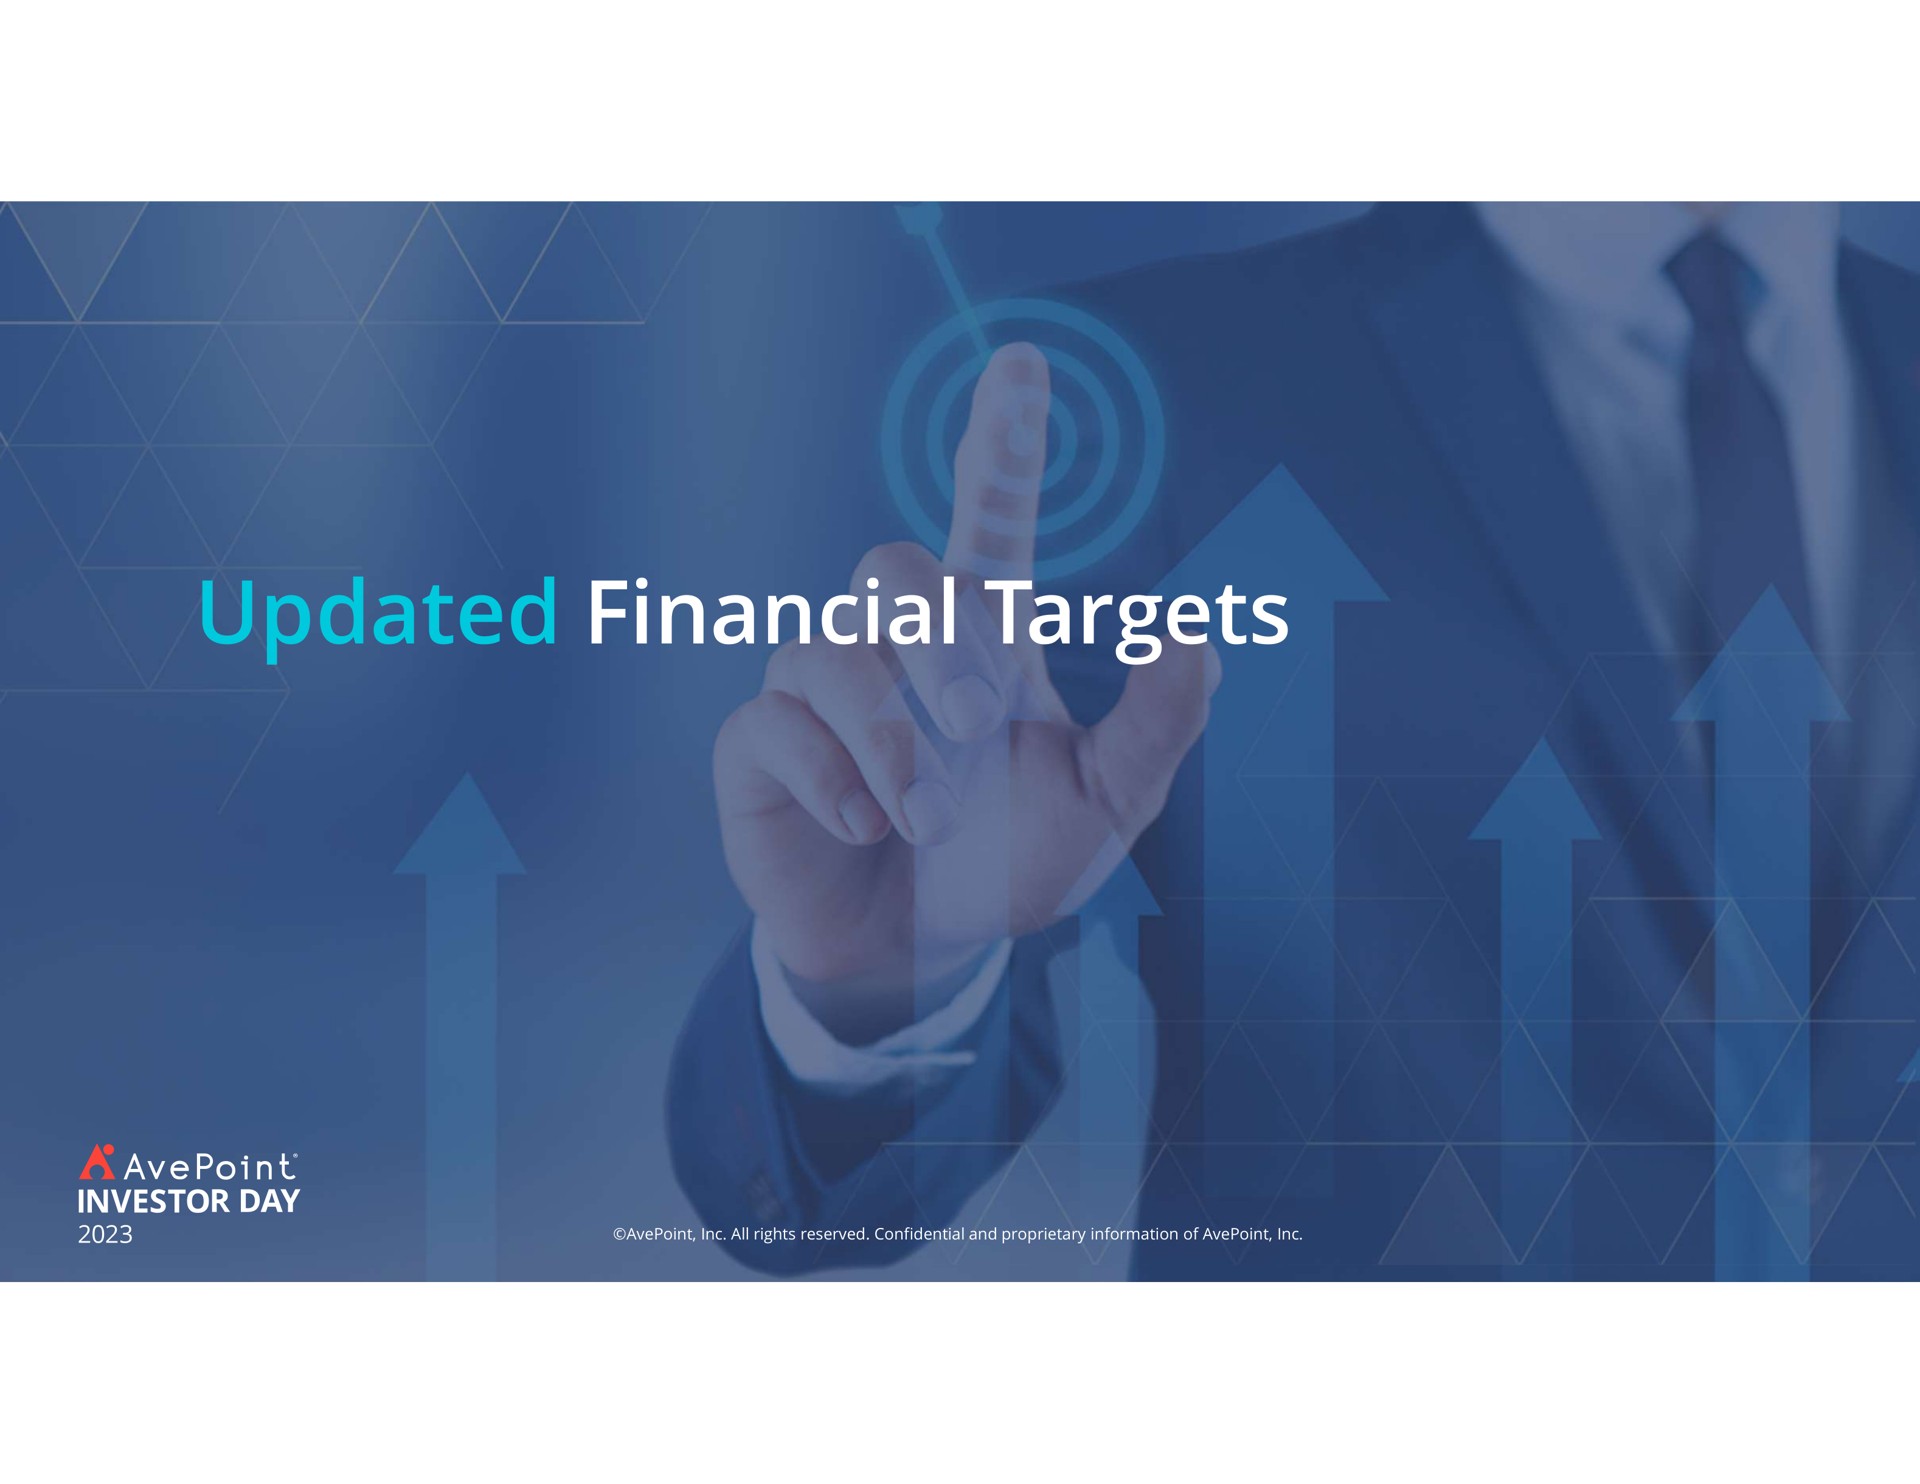 updated financial targets | AvePoint